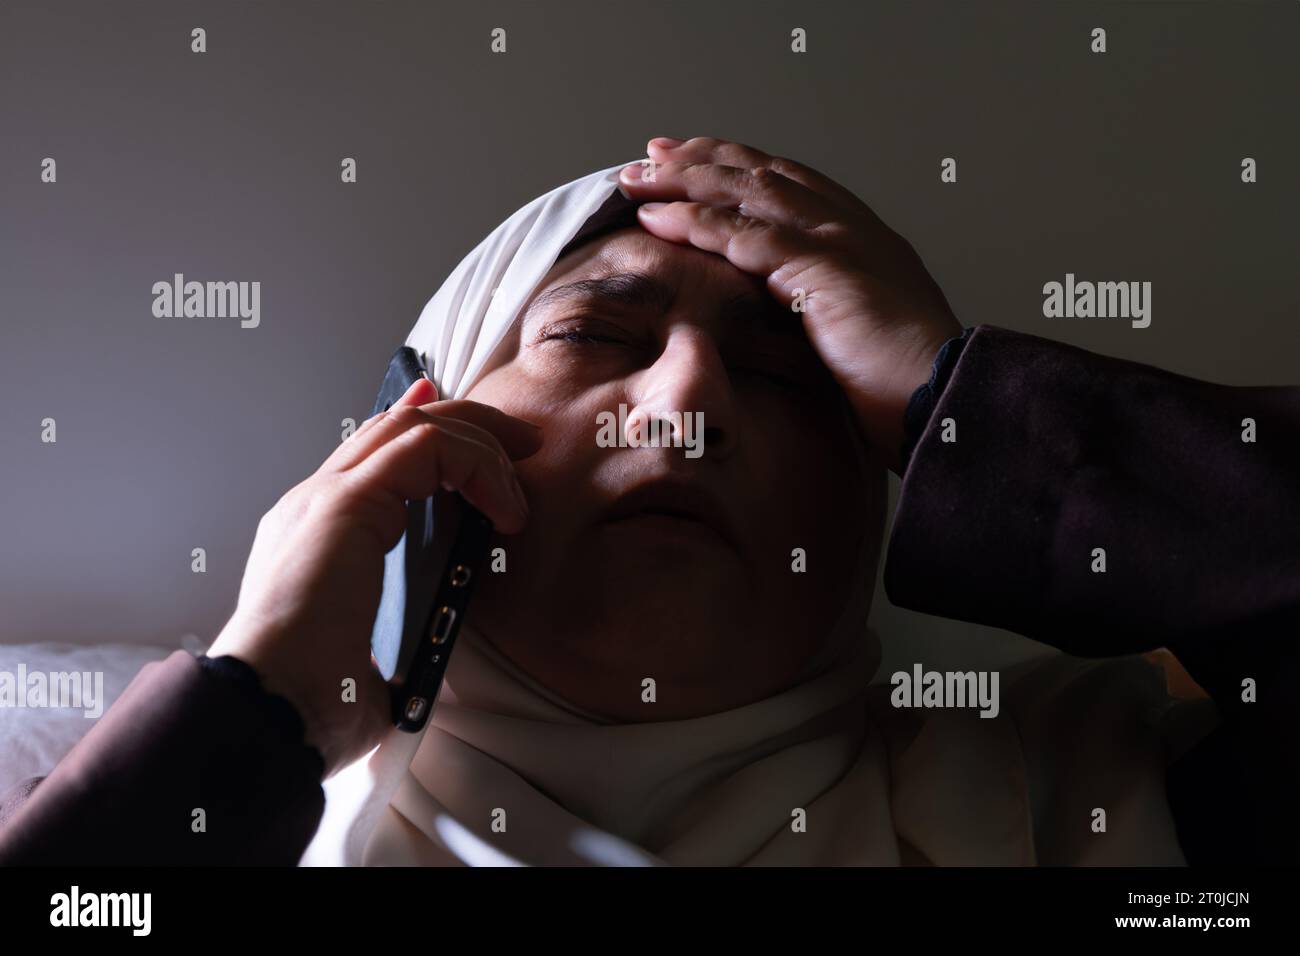 A Muslim woman was informed by phone call of shocking news or misfortune, and her expression shows helplessness and fear. Stock Photo